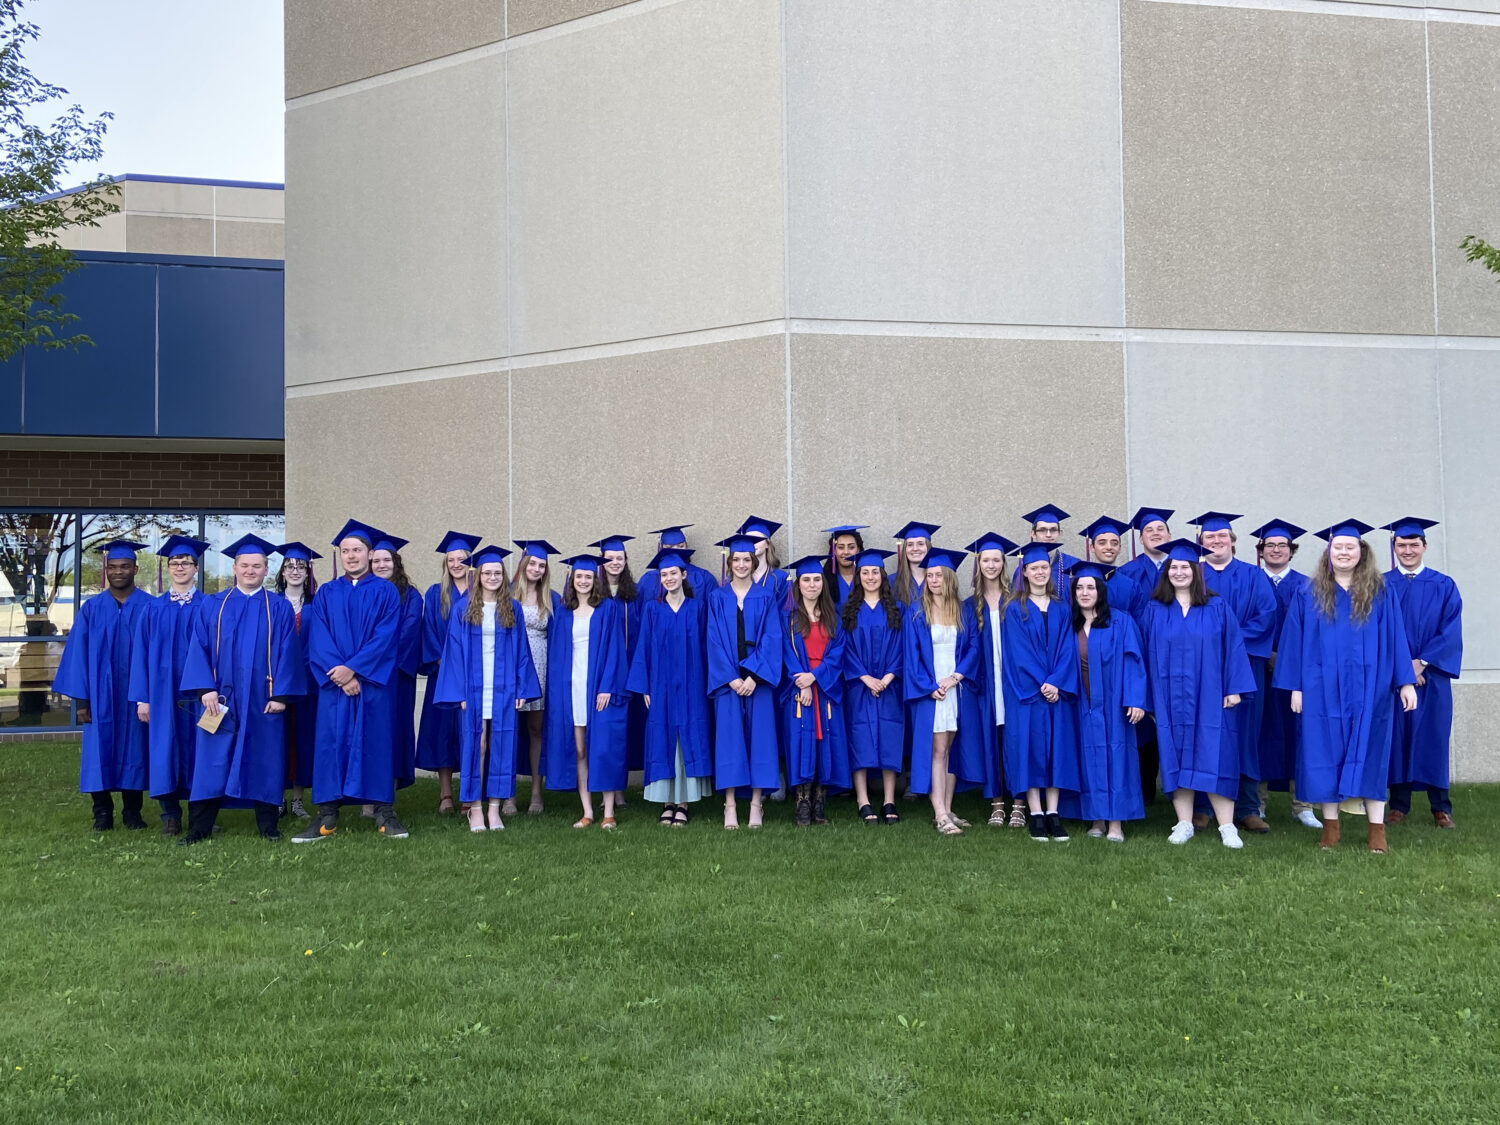 BVA graduates 51 students from throughout the state, celebrates 10-year anniversary